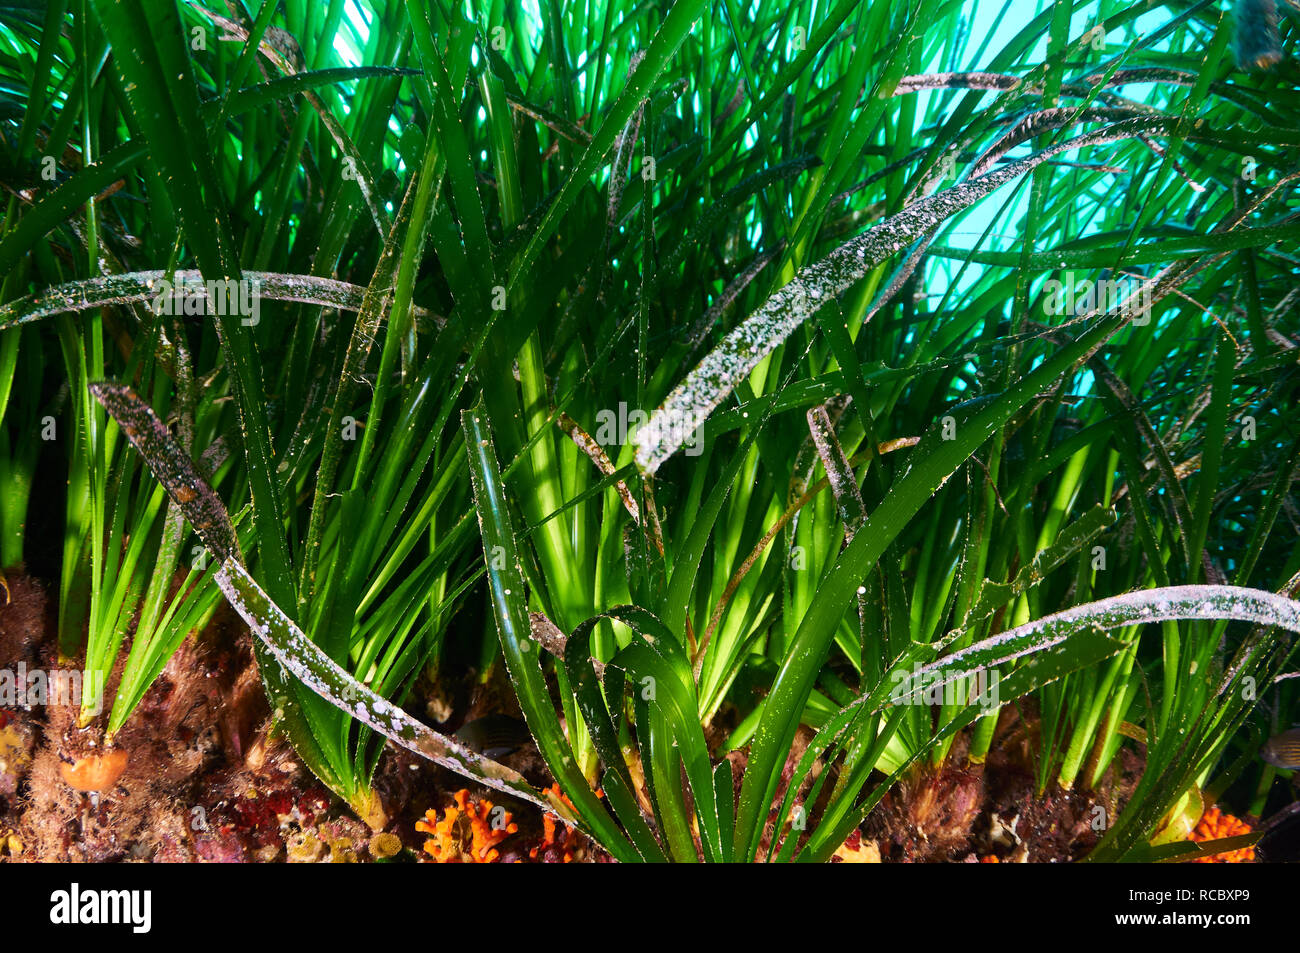 Underwater detail view of foliage of Neptune seagrass (Posidonia oceanica) meadow in Ses Salines Natural Park (Formentera, Balearic Islands, Spain) Stock Photo